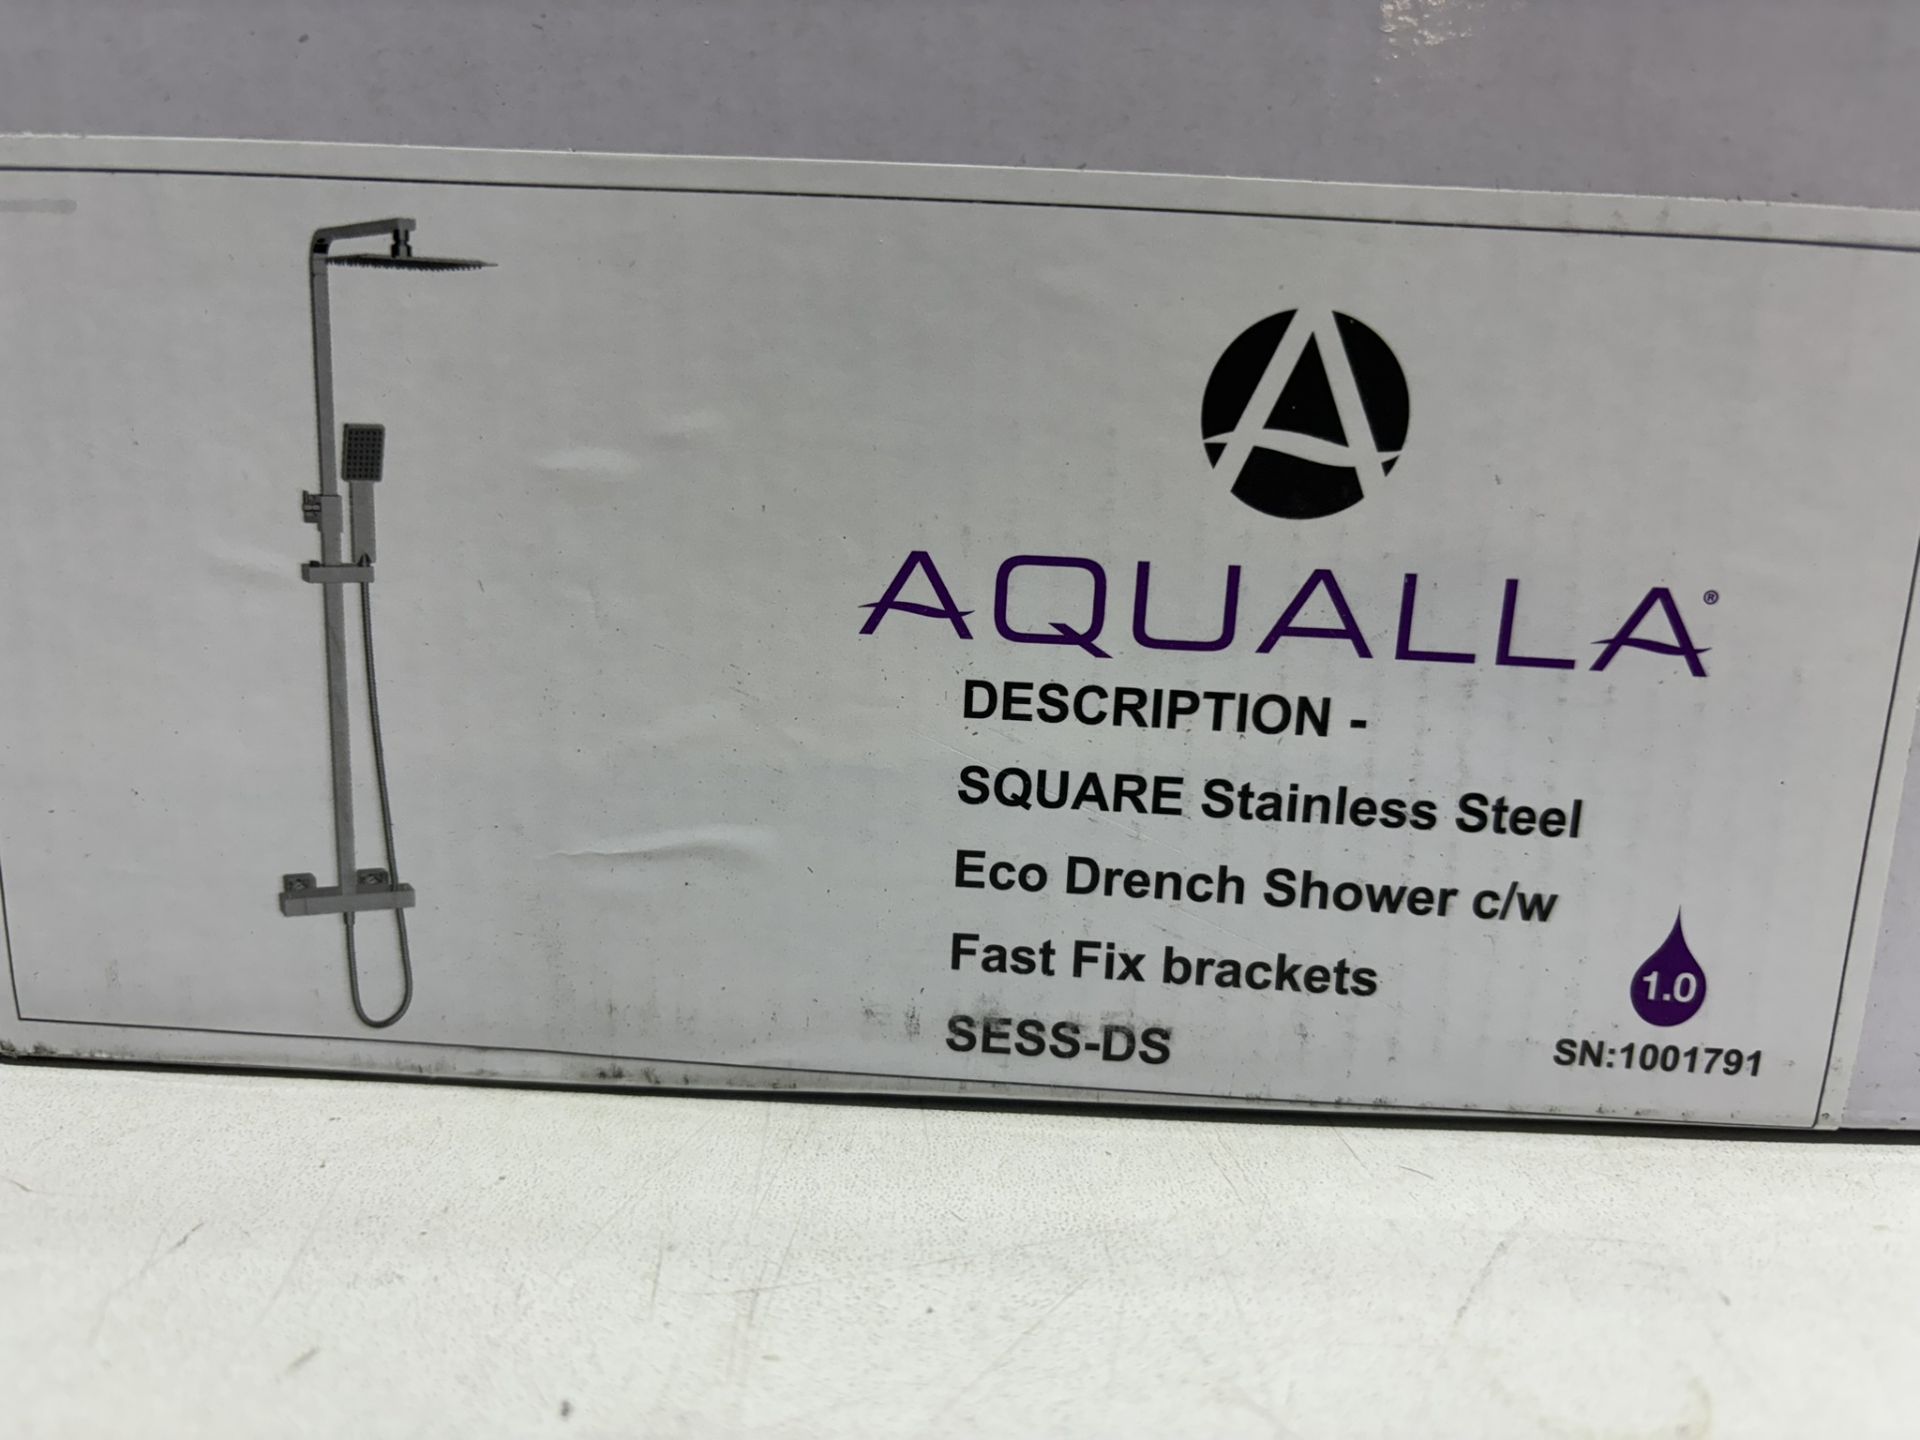 Aqualla SESS-DS Square Stainless Steel Eco Drench Shower c/w Fast Fit Brackets - Image 2 of 4